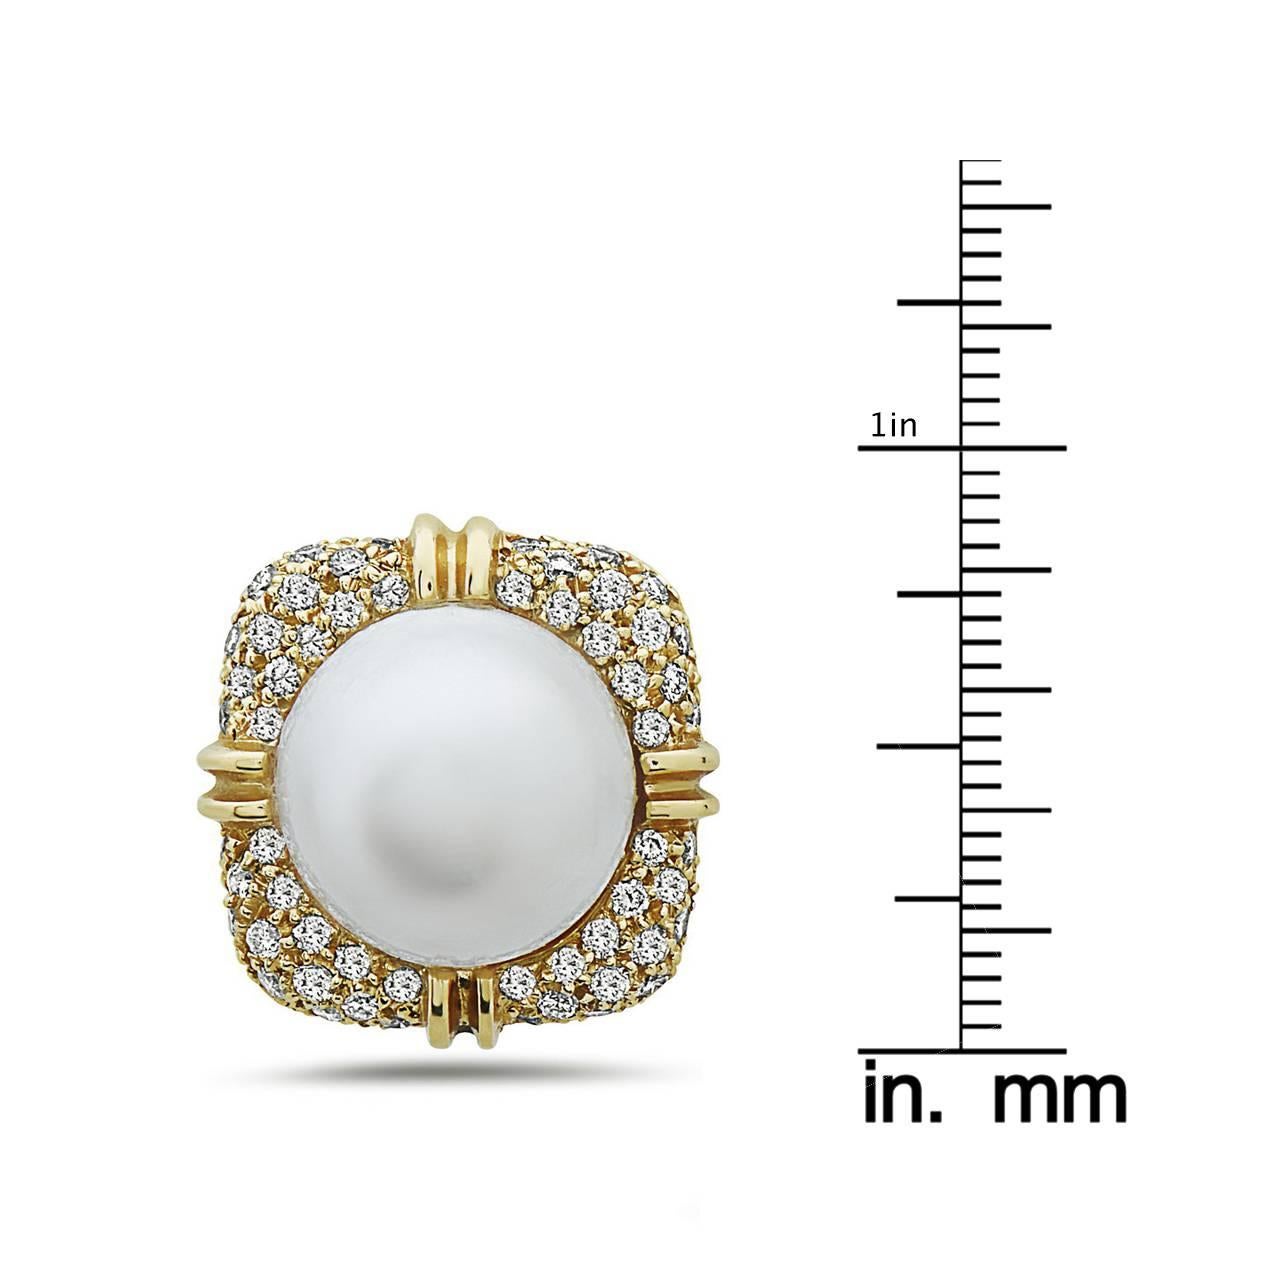 Approx total weight: 2 cts
Diamond Color: E-F
Diamond Clarity: Vs 
Cut: Excellent 
Pearl Quality: AAA

All pieces come with a professional appraisal from GAL, a reputable lab accepted by most insurance companies which will include the retail value